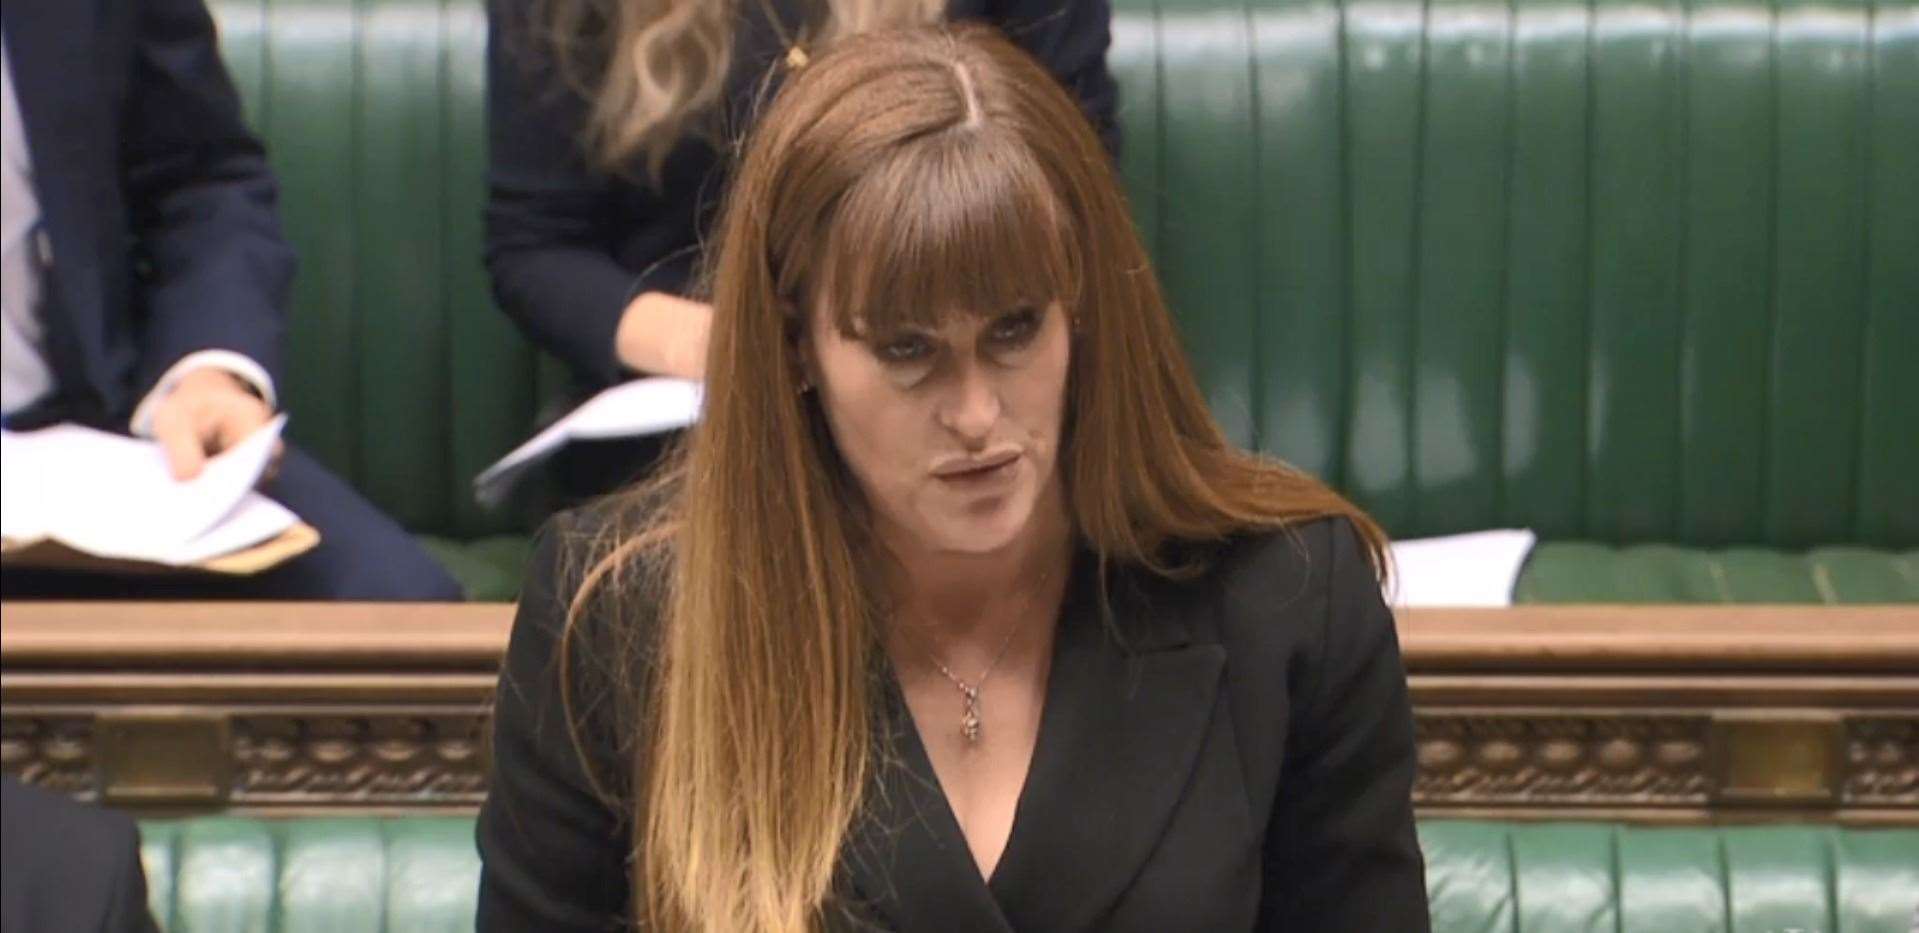 Kelly Tolhurst giving a statement in parliament